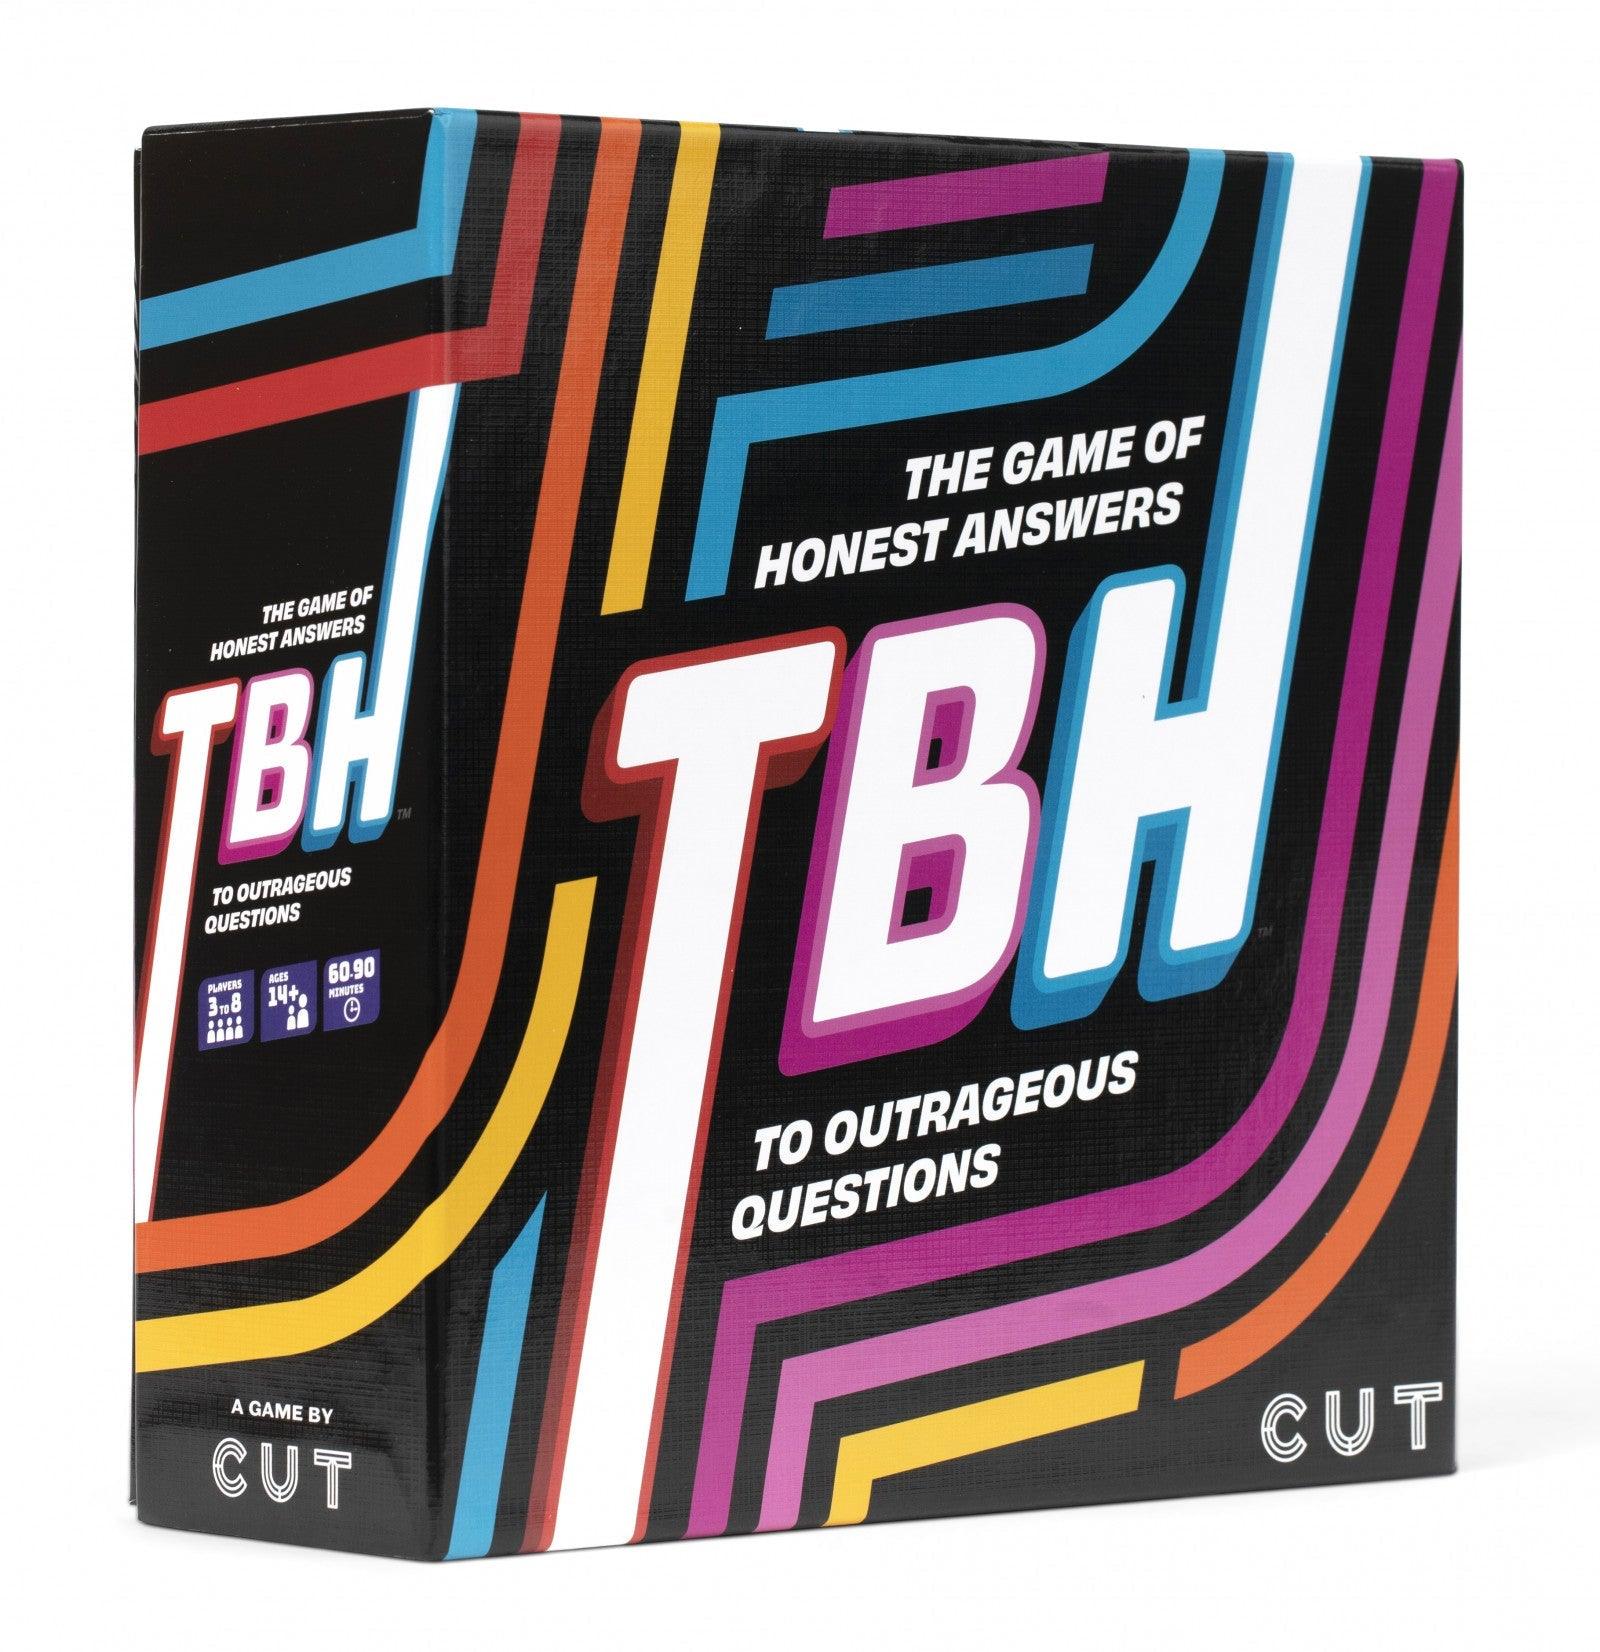 VR-97030 TBH The Game of Honest Answers to Outrageous Questions - Cut Games - Titan Pop Culture